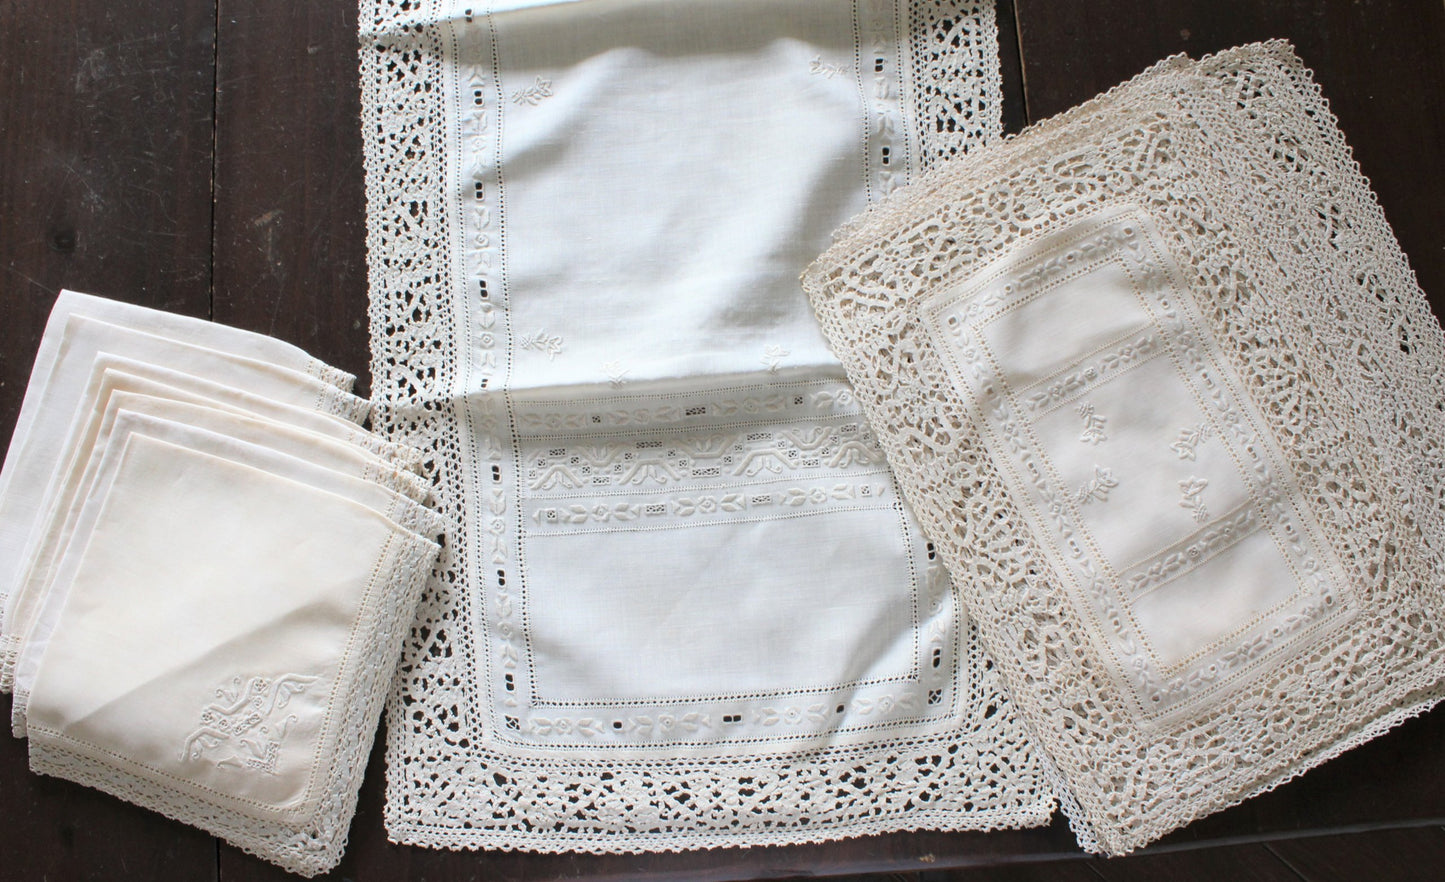 Placemats and Napkins with Runner Set, Embroidered / Reticella Lace, Set for 8, Antique